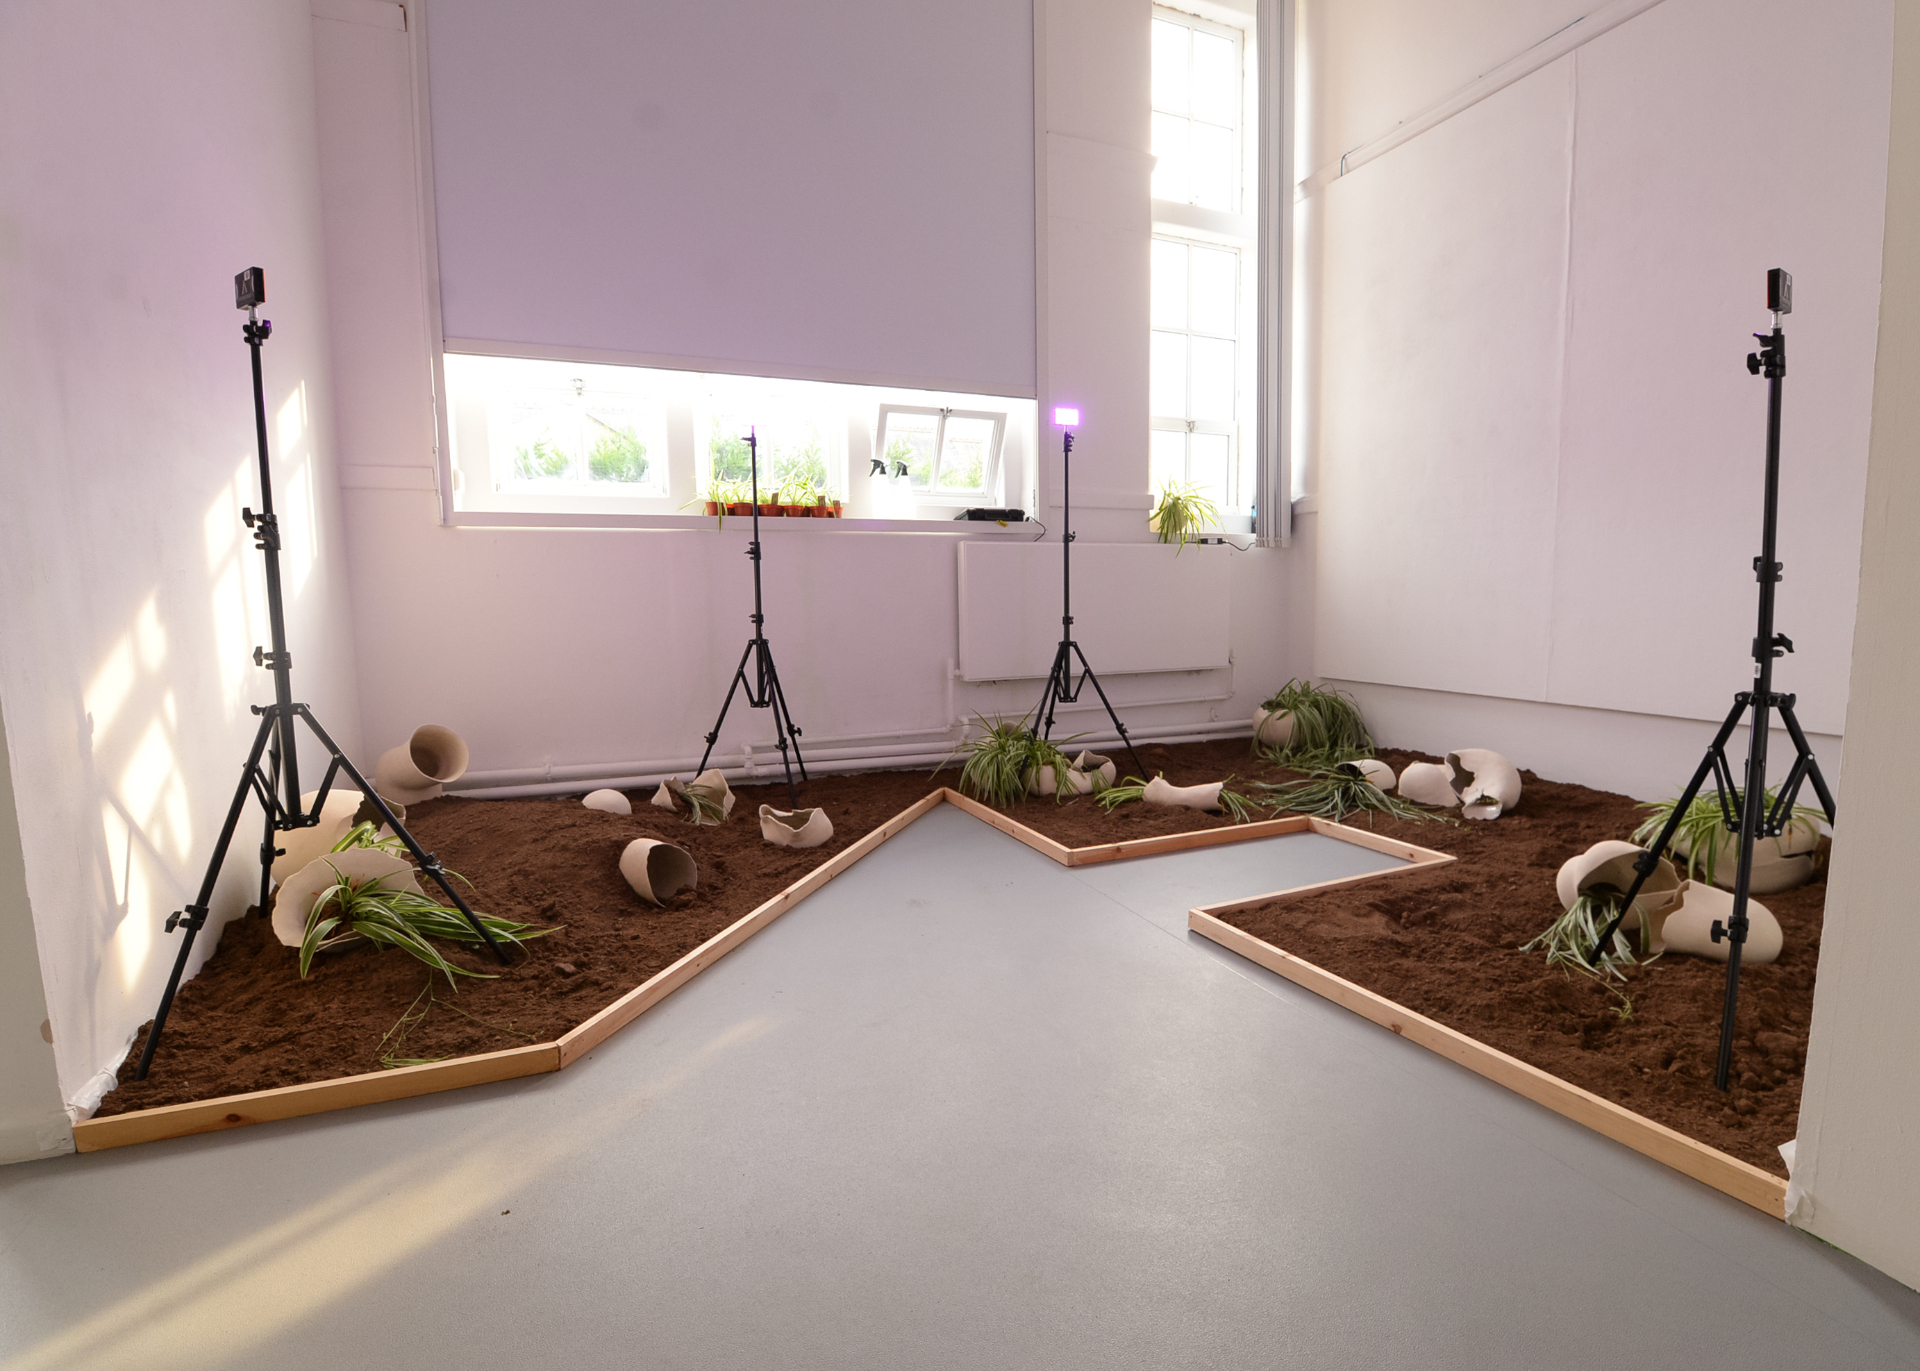 Soil covered in plaster body parts and tripod lights in studio